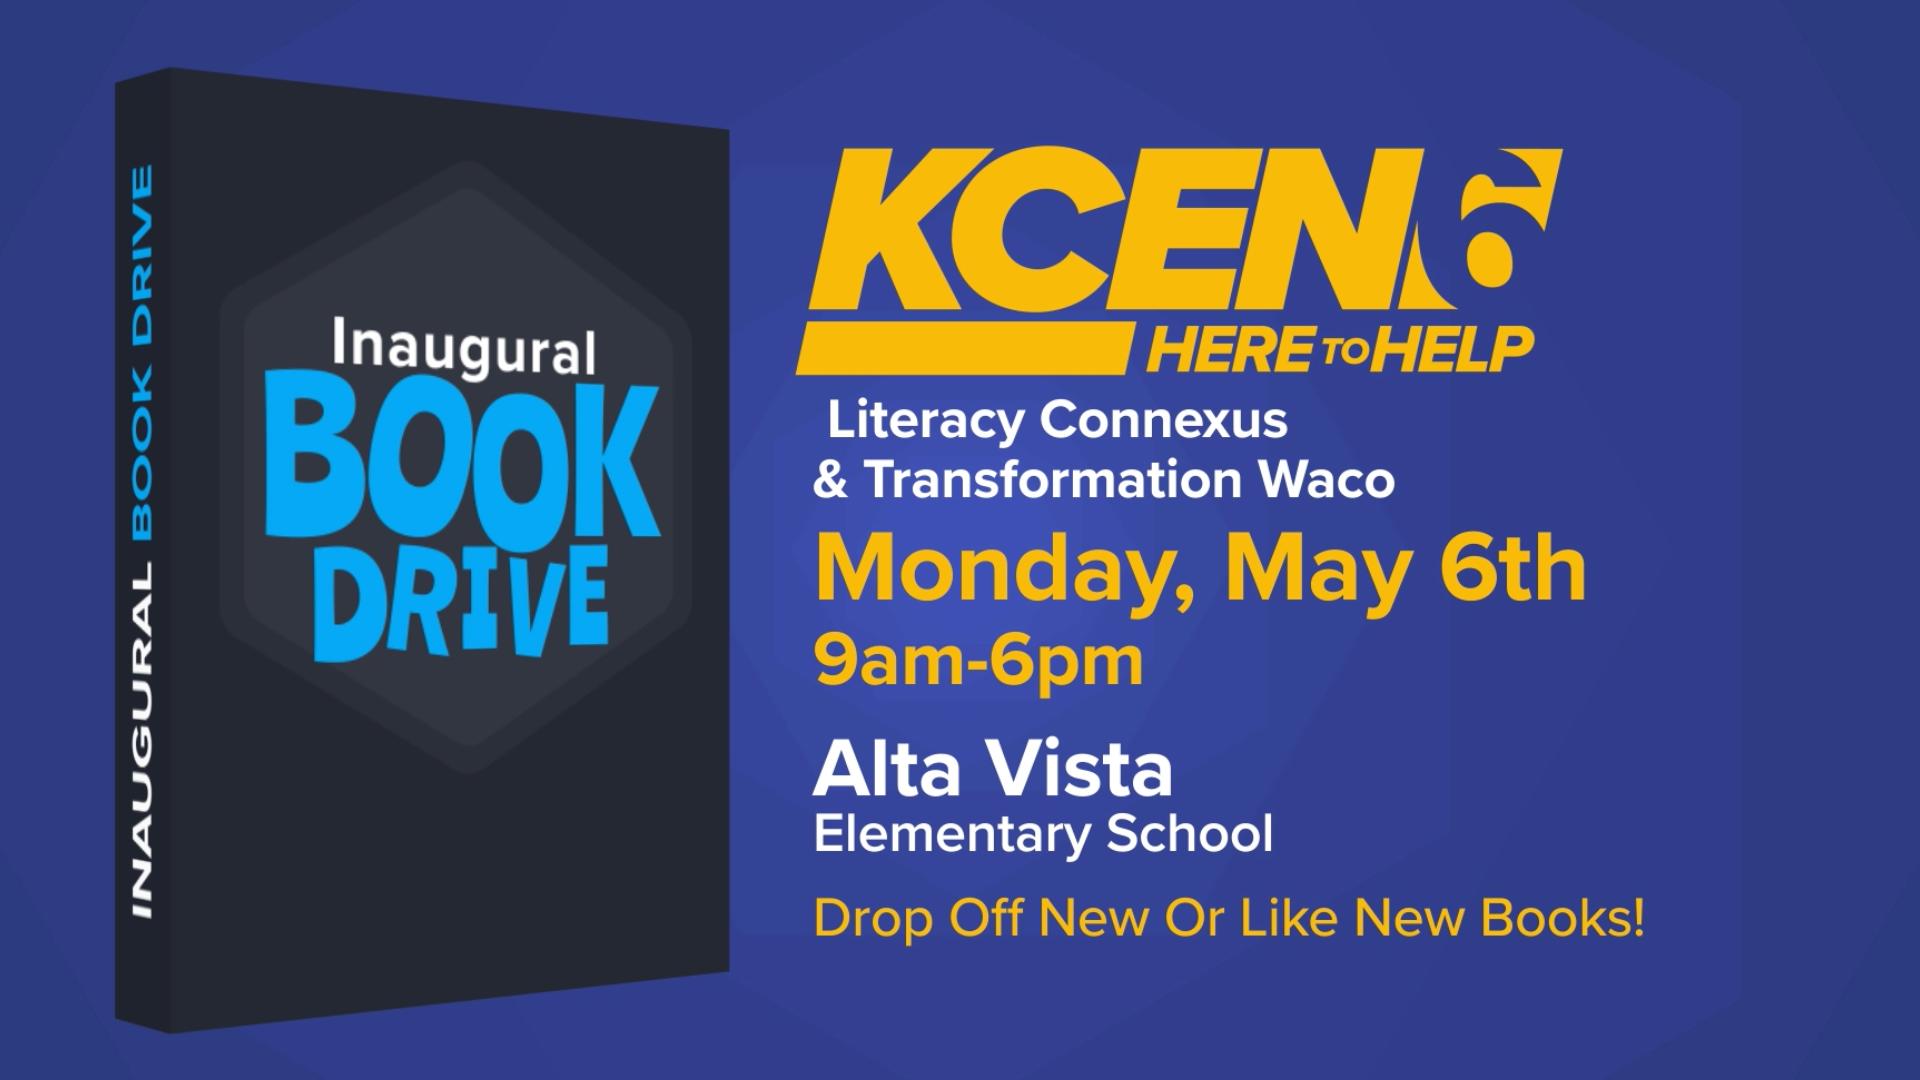 The Waco Community Book Drive is taking place May 1 to May 14. KCEN 6 News is a partner.